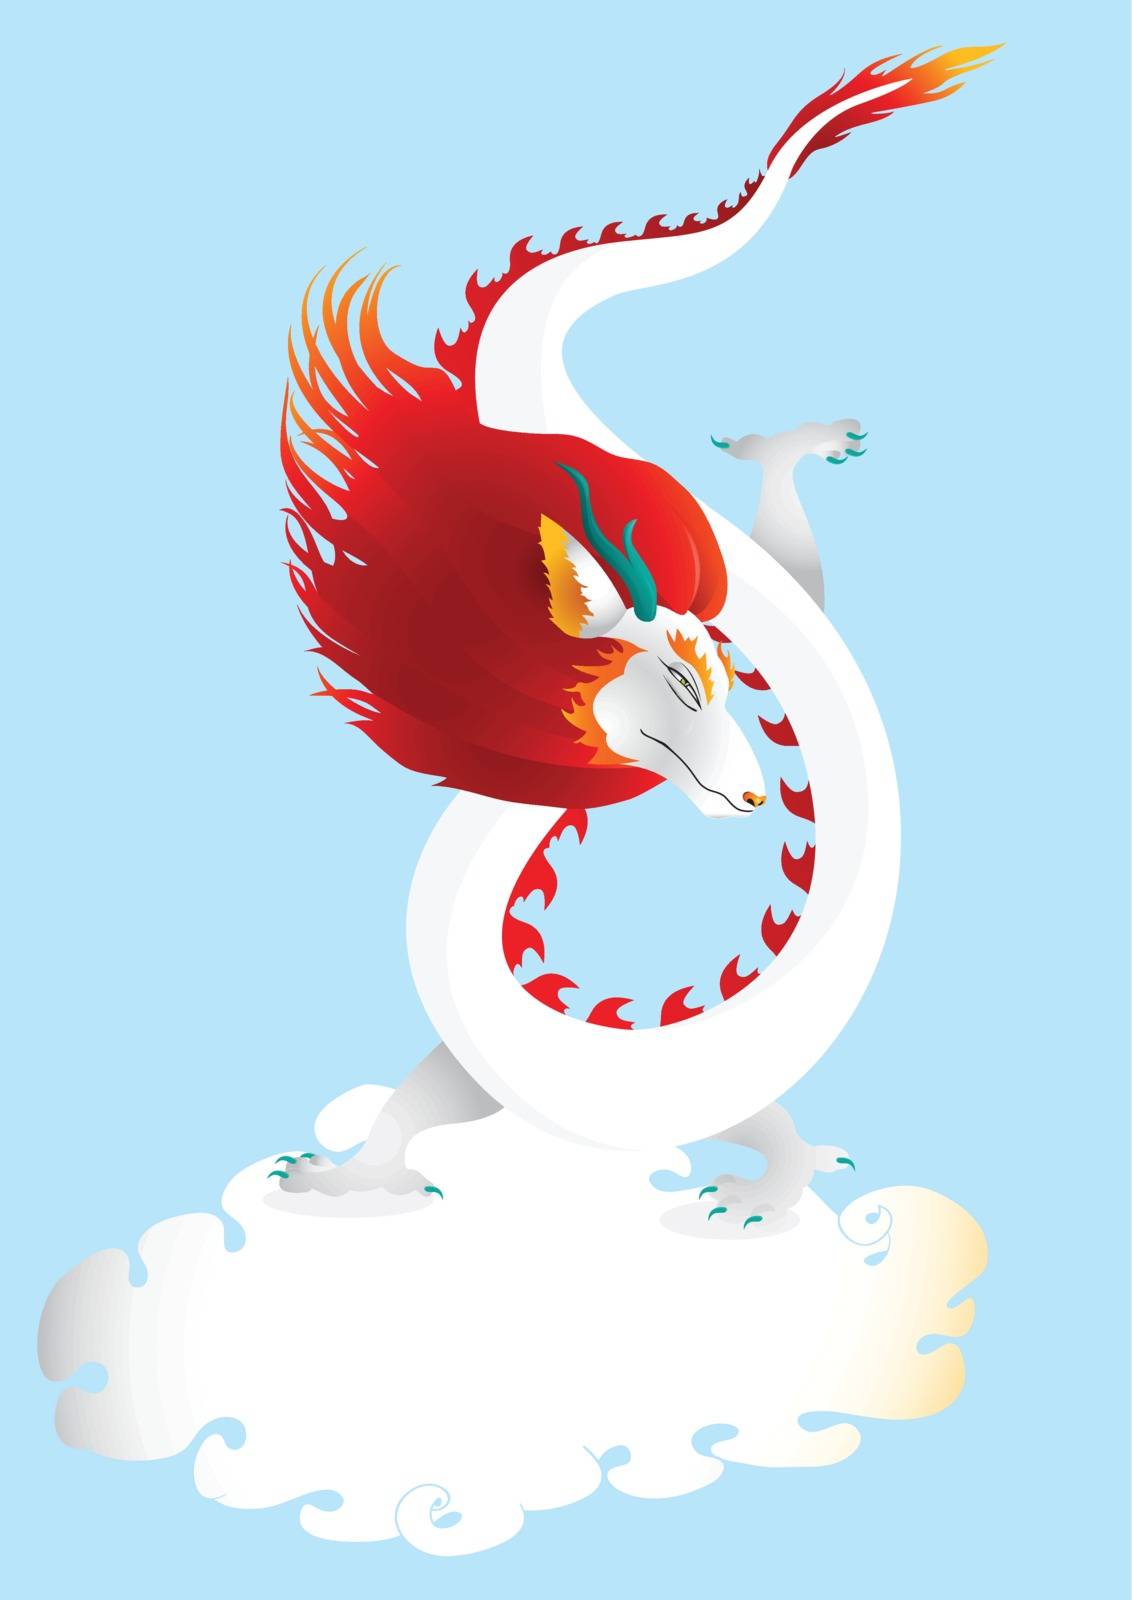 White dragon in the sky with cloud  vector illustration